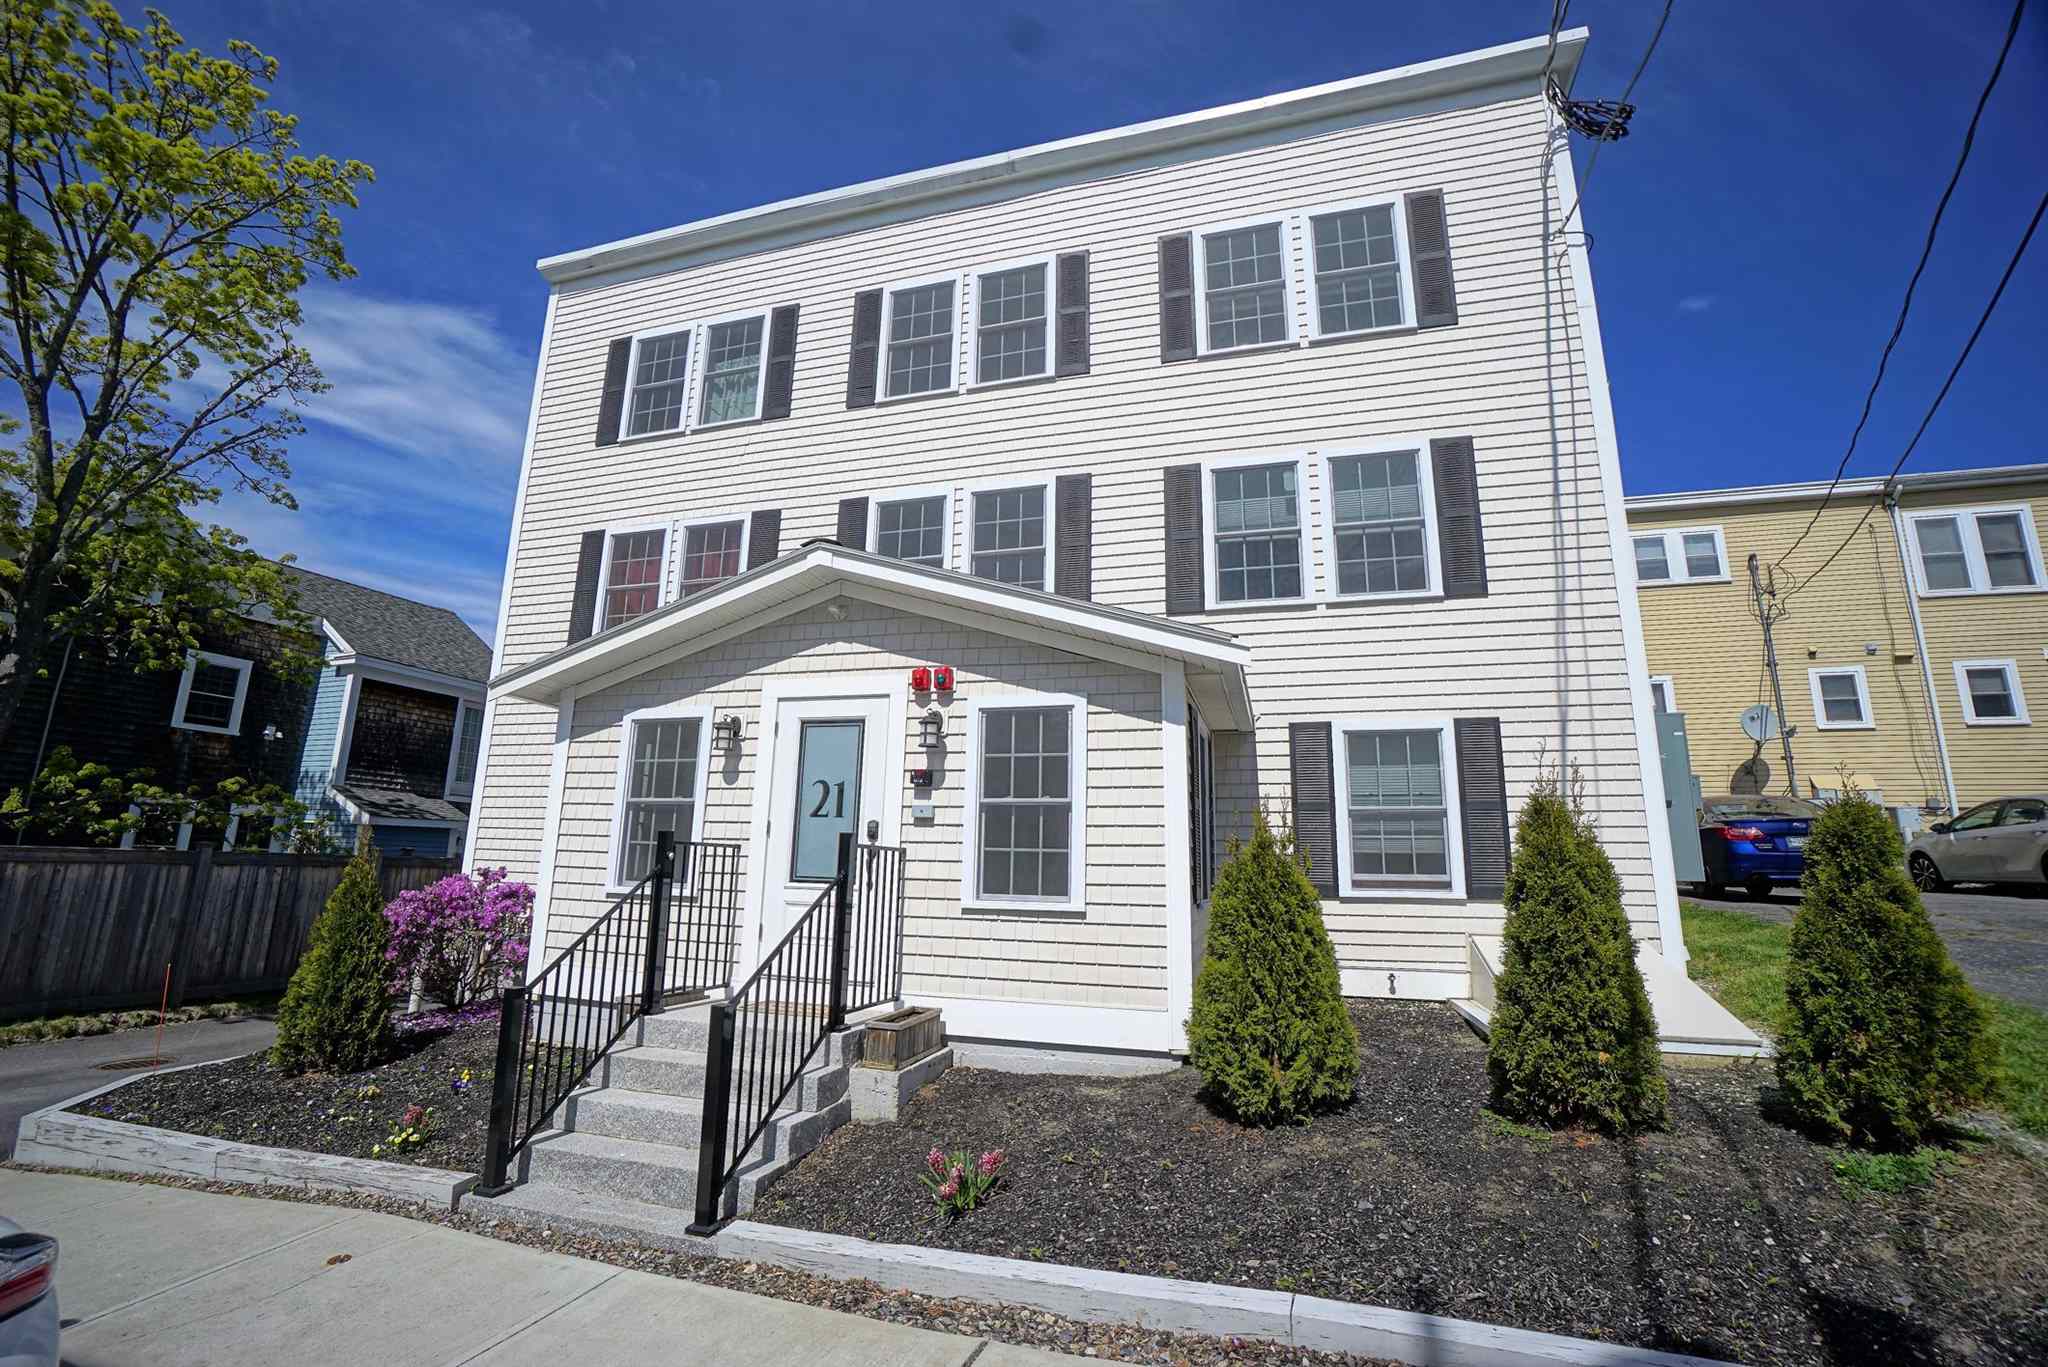 Photo of 21 Brewster Street Portsmouth NH 03801